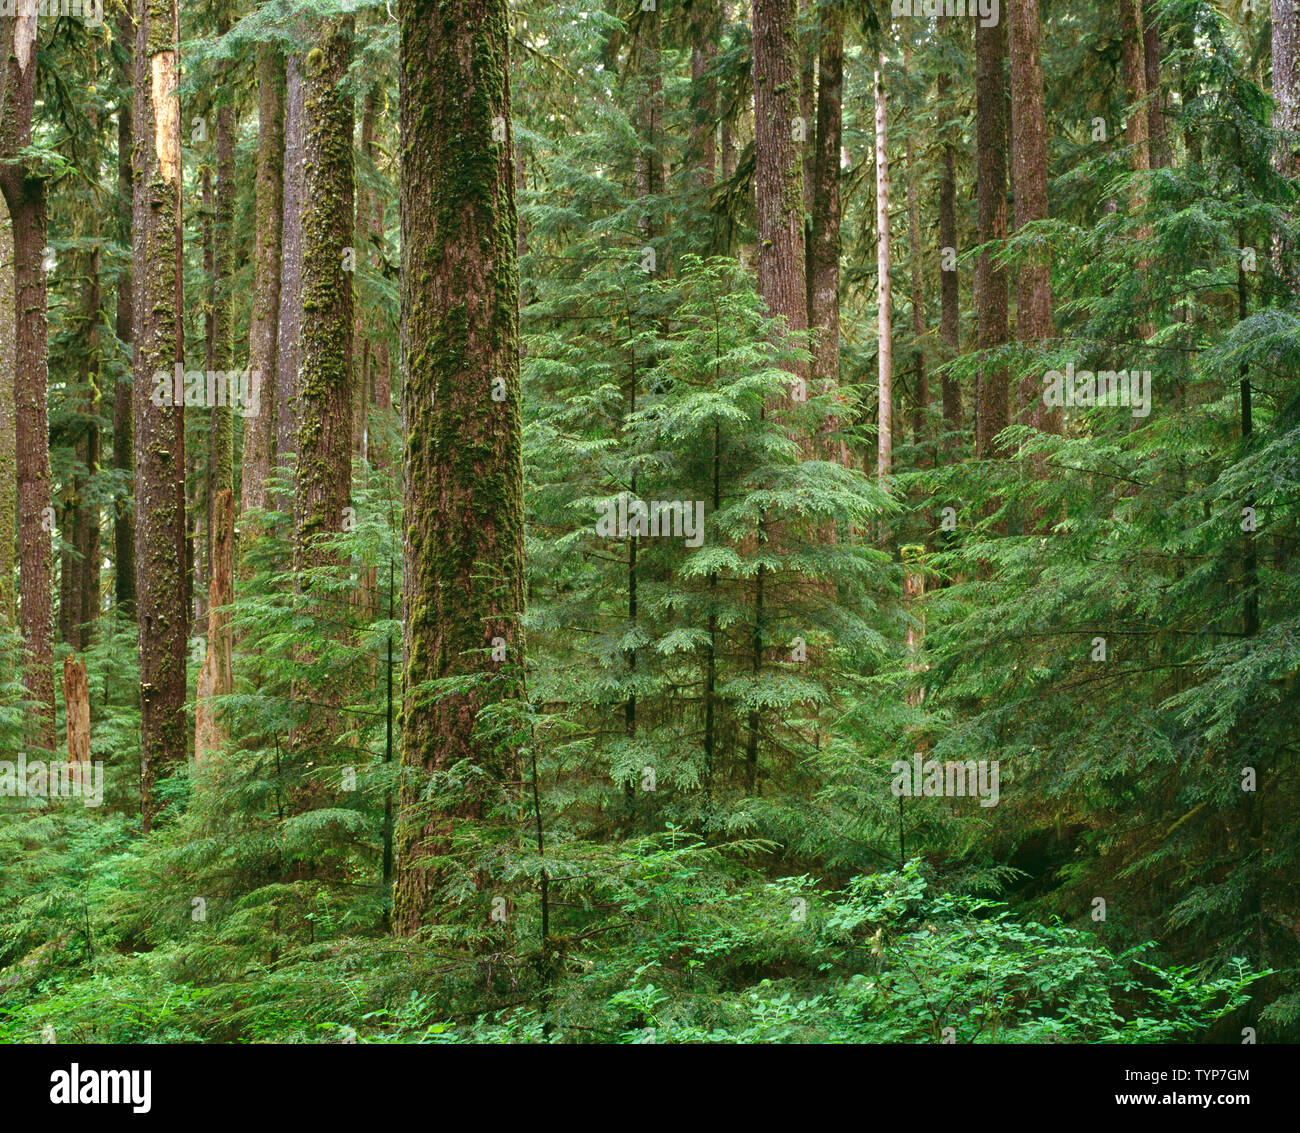 USA, Washington, Olympic National Park, Ancient forest of western hemlock and Sitka spruce in the Sol Duc Valley. Stock Photo